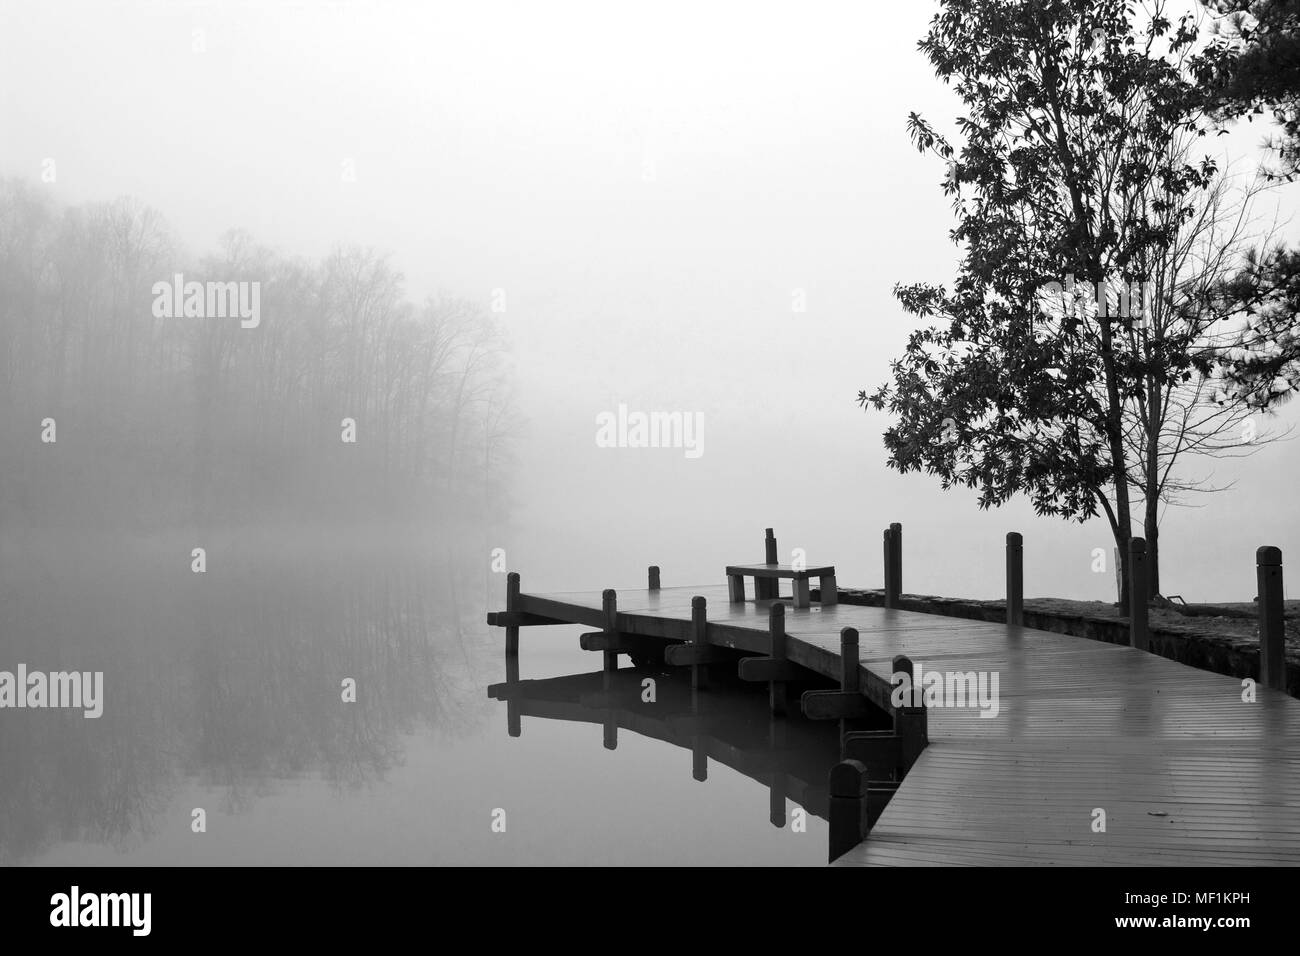 A thick blanket of fog covers a wooden deck and lake on a cold winter day. Stock Photo